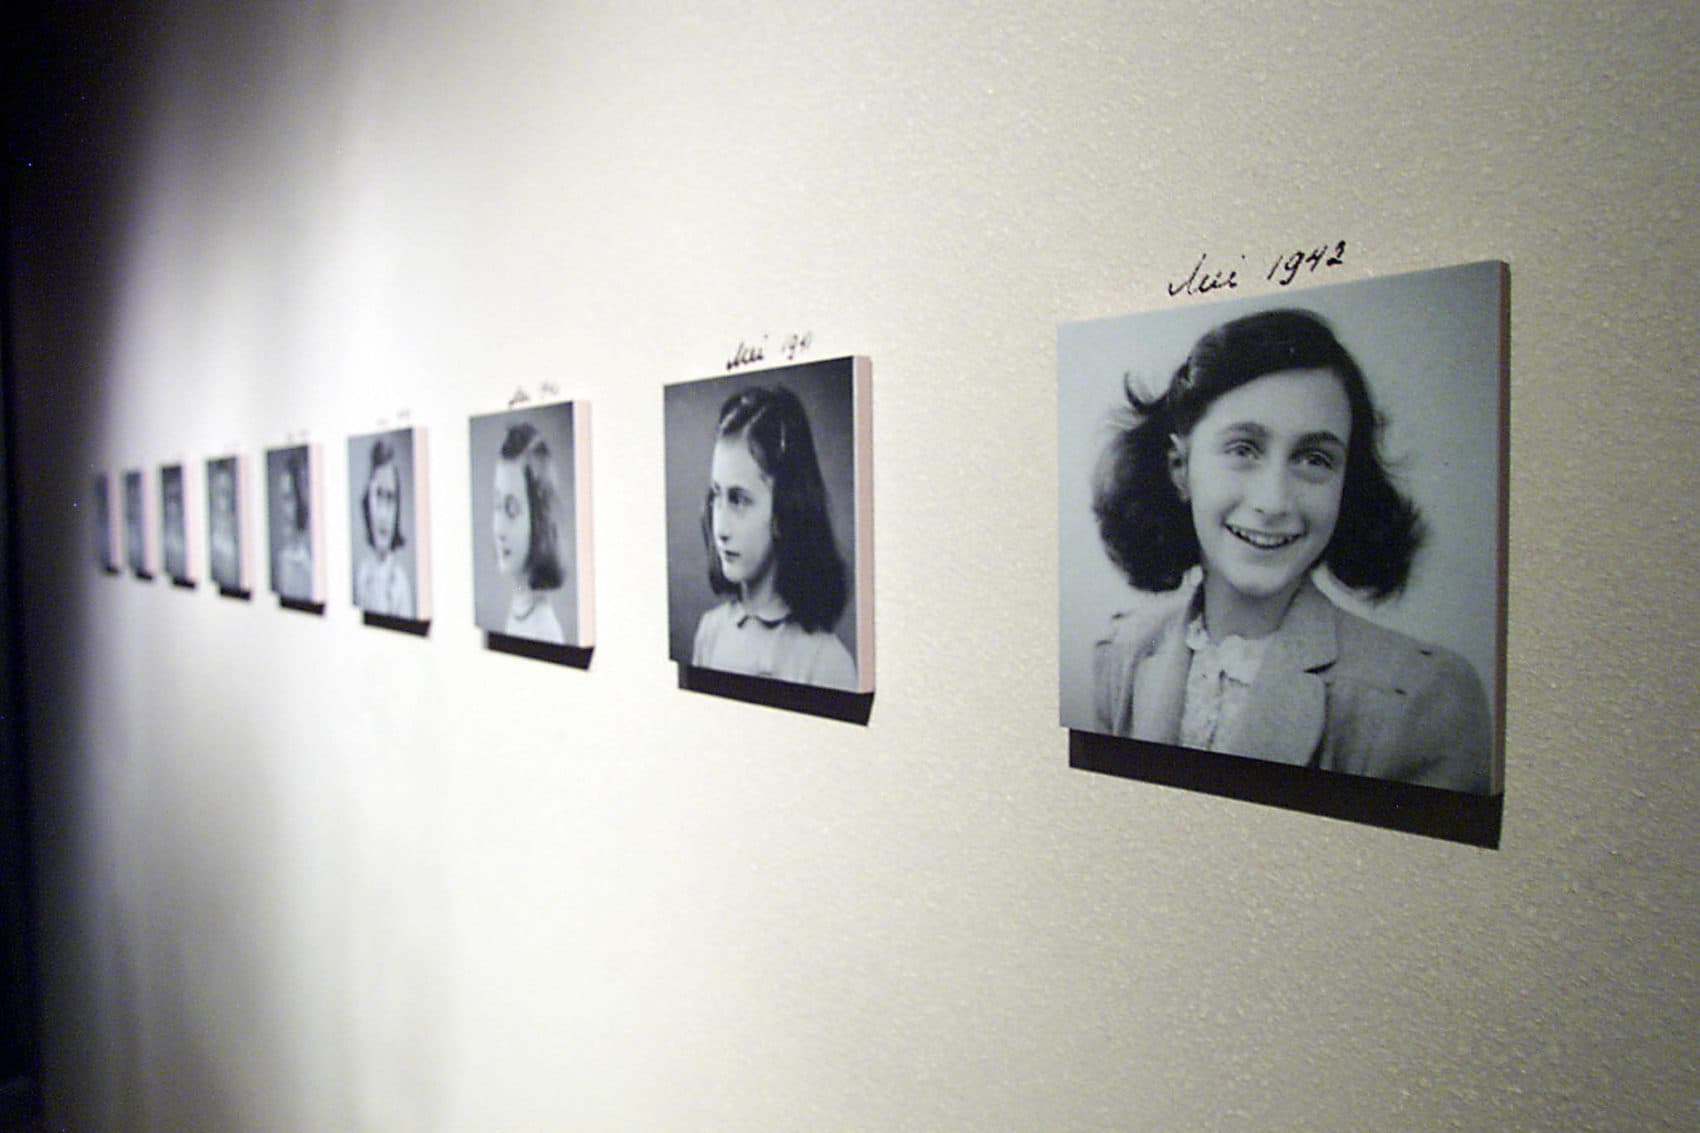 Anne Frank's father hoped to get the family to the U.S., but visa programs that would have allowed families like the Franks to come to escape the Holocaust were not fully implemented. (Tim Sloan/AFP/Getty Images)